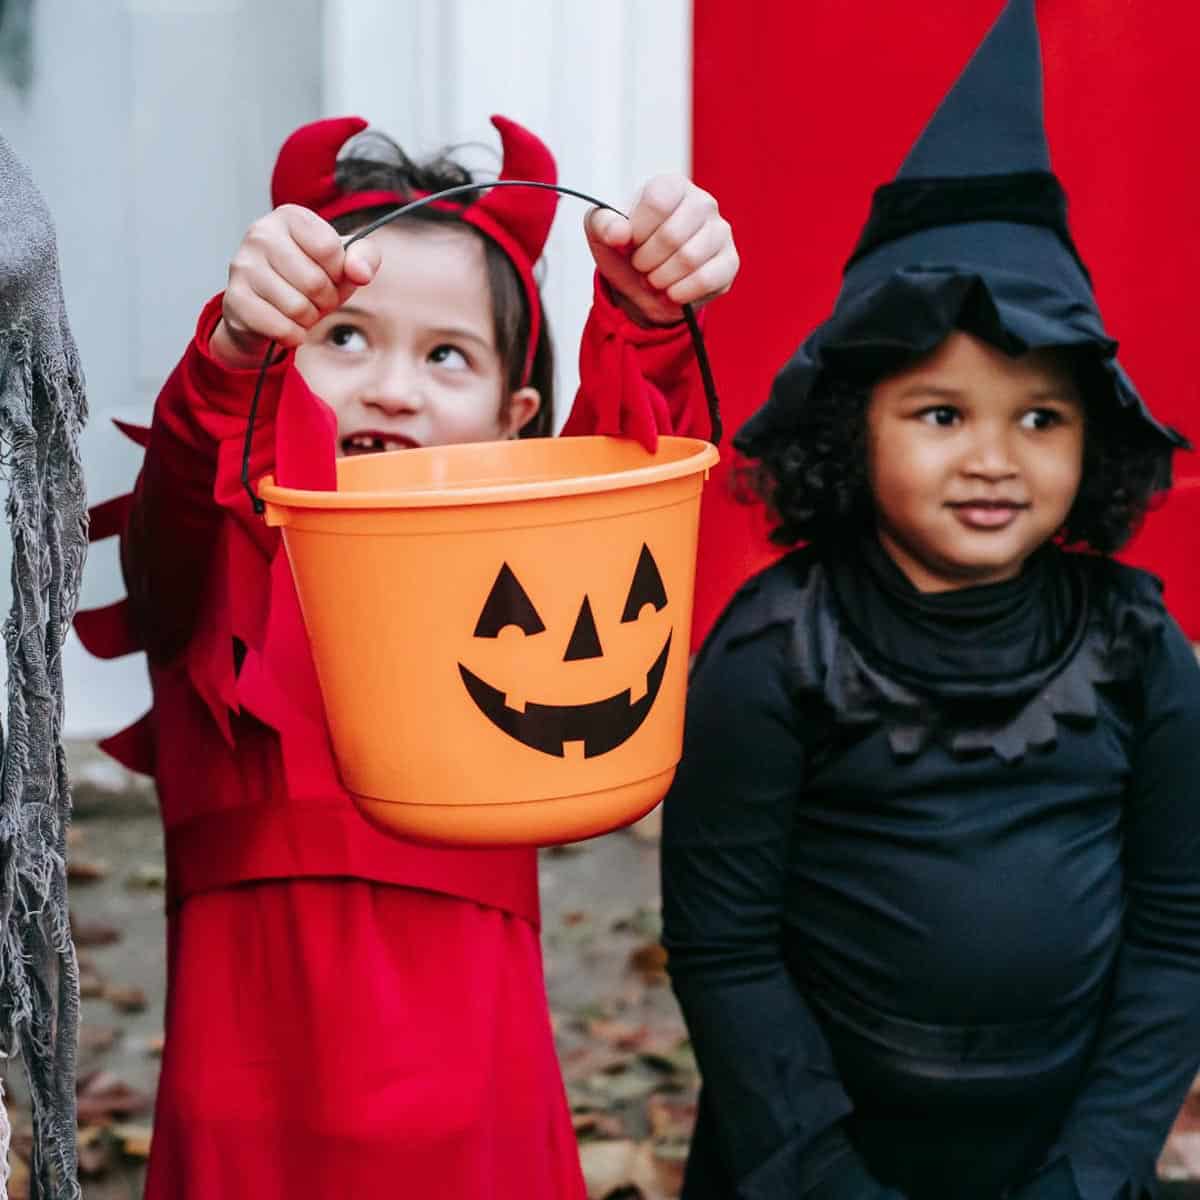 2 young kids, one dressed as a devil and one dressed as a witch. The child dressed as a devil is holding up a Halloween pumpkin candy bucket. 